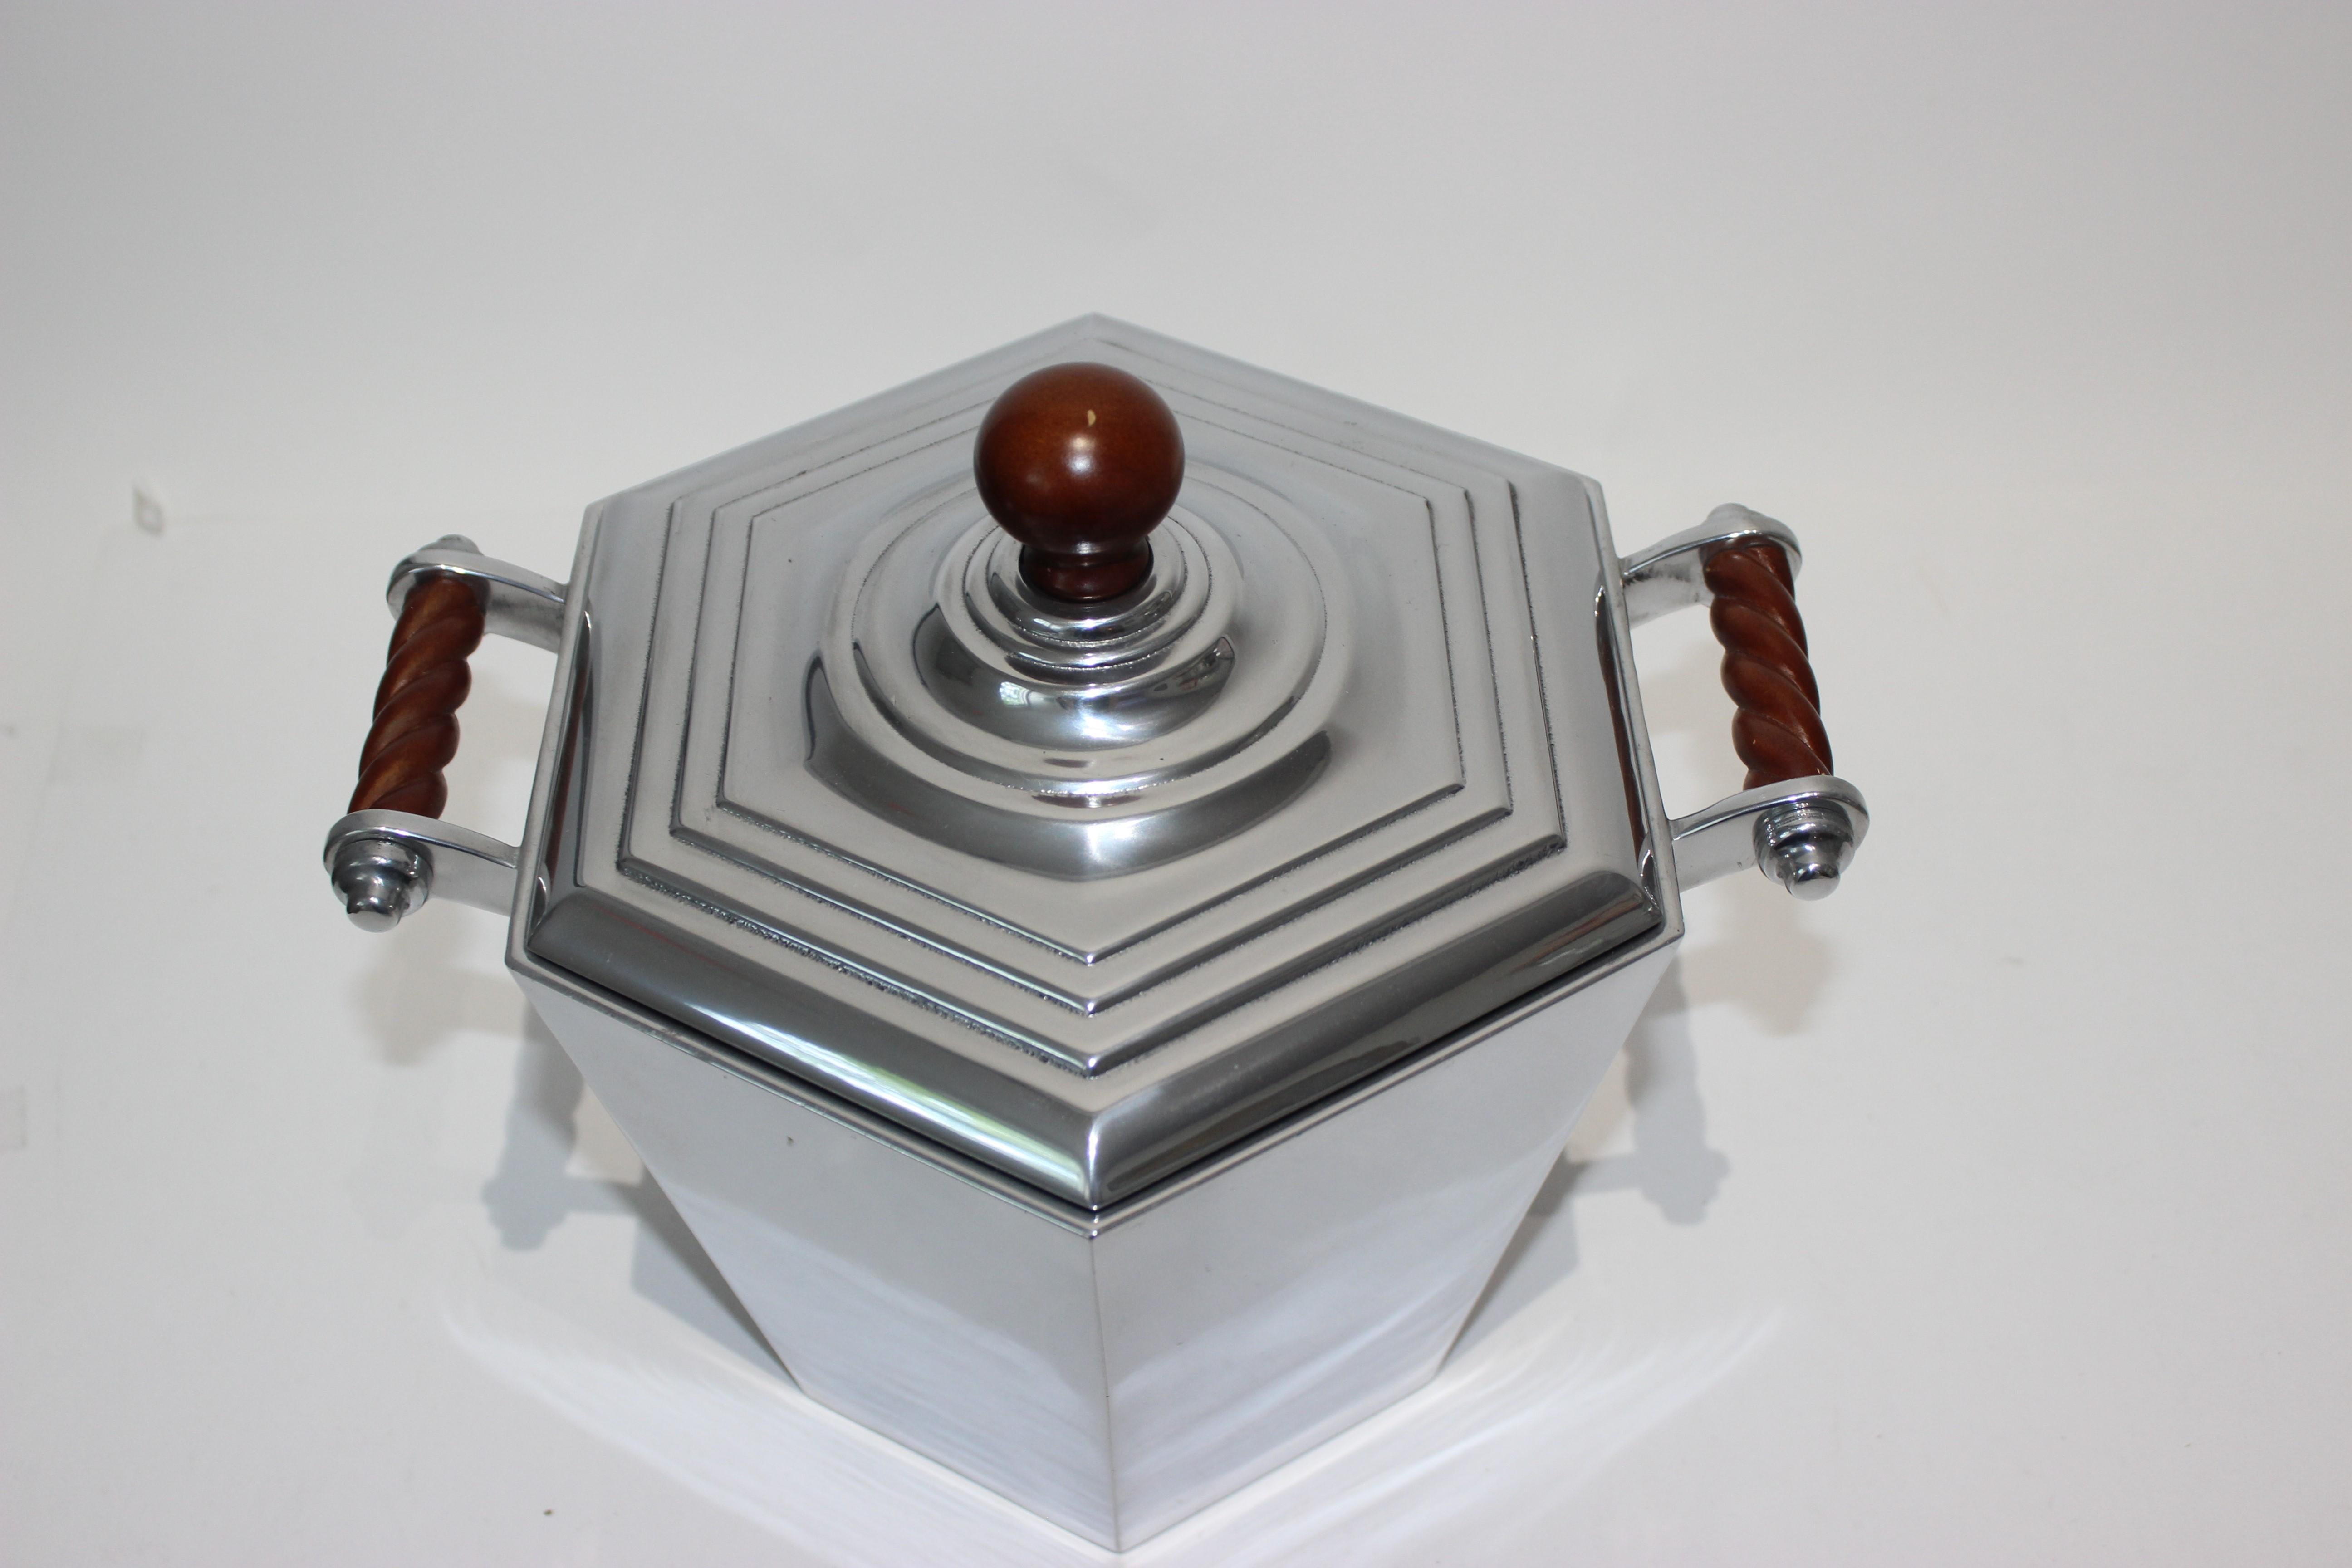 Reed & Barton Art Deco revival polished aluminum ice bucket from a Palm Beach estate.

There are some minor tiny cosmetic surface blemishes on the wood parts.

Note: the last picture shows the ice bucket in a staged setting, only the ice bucket